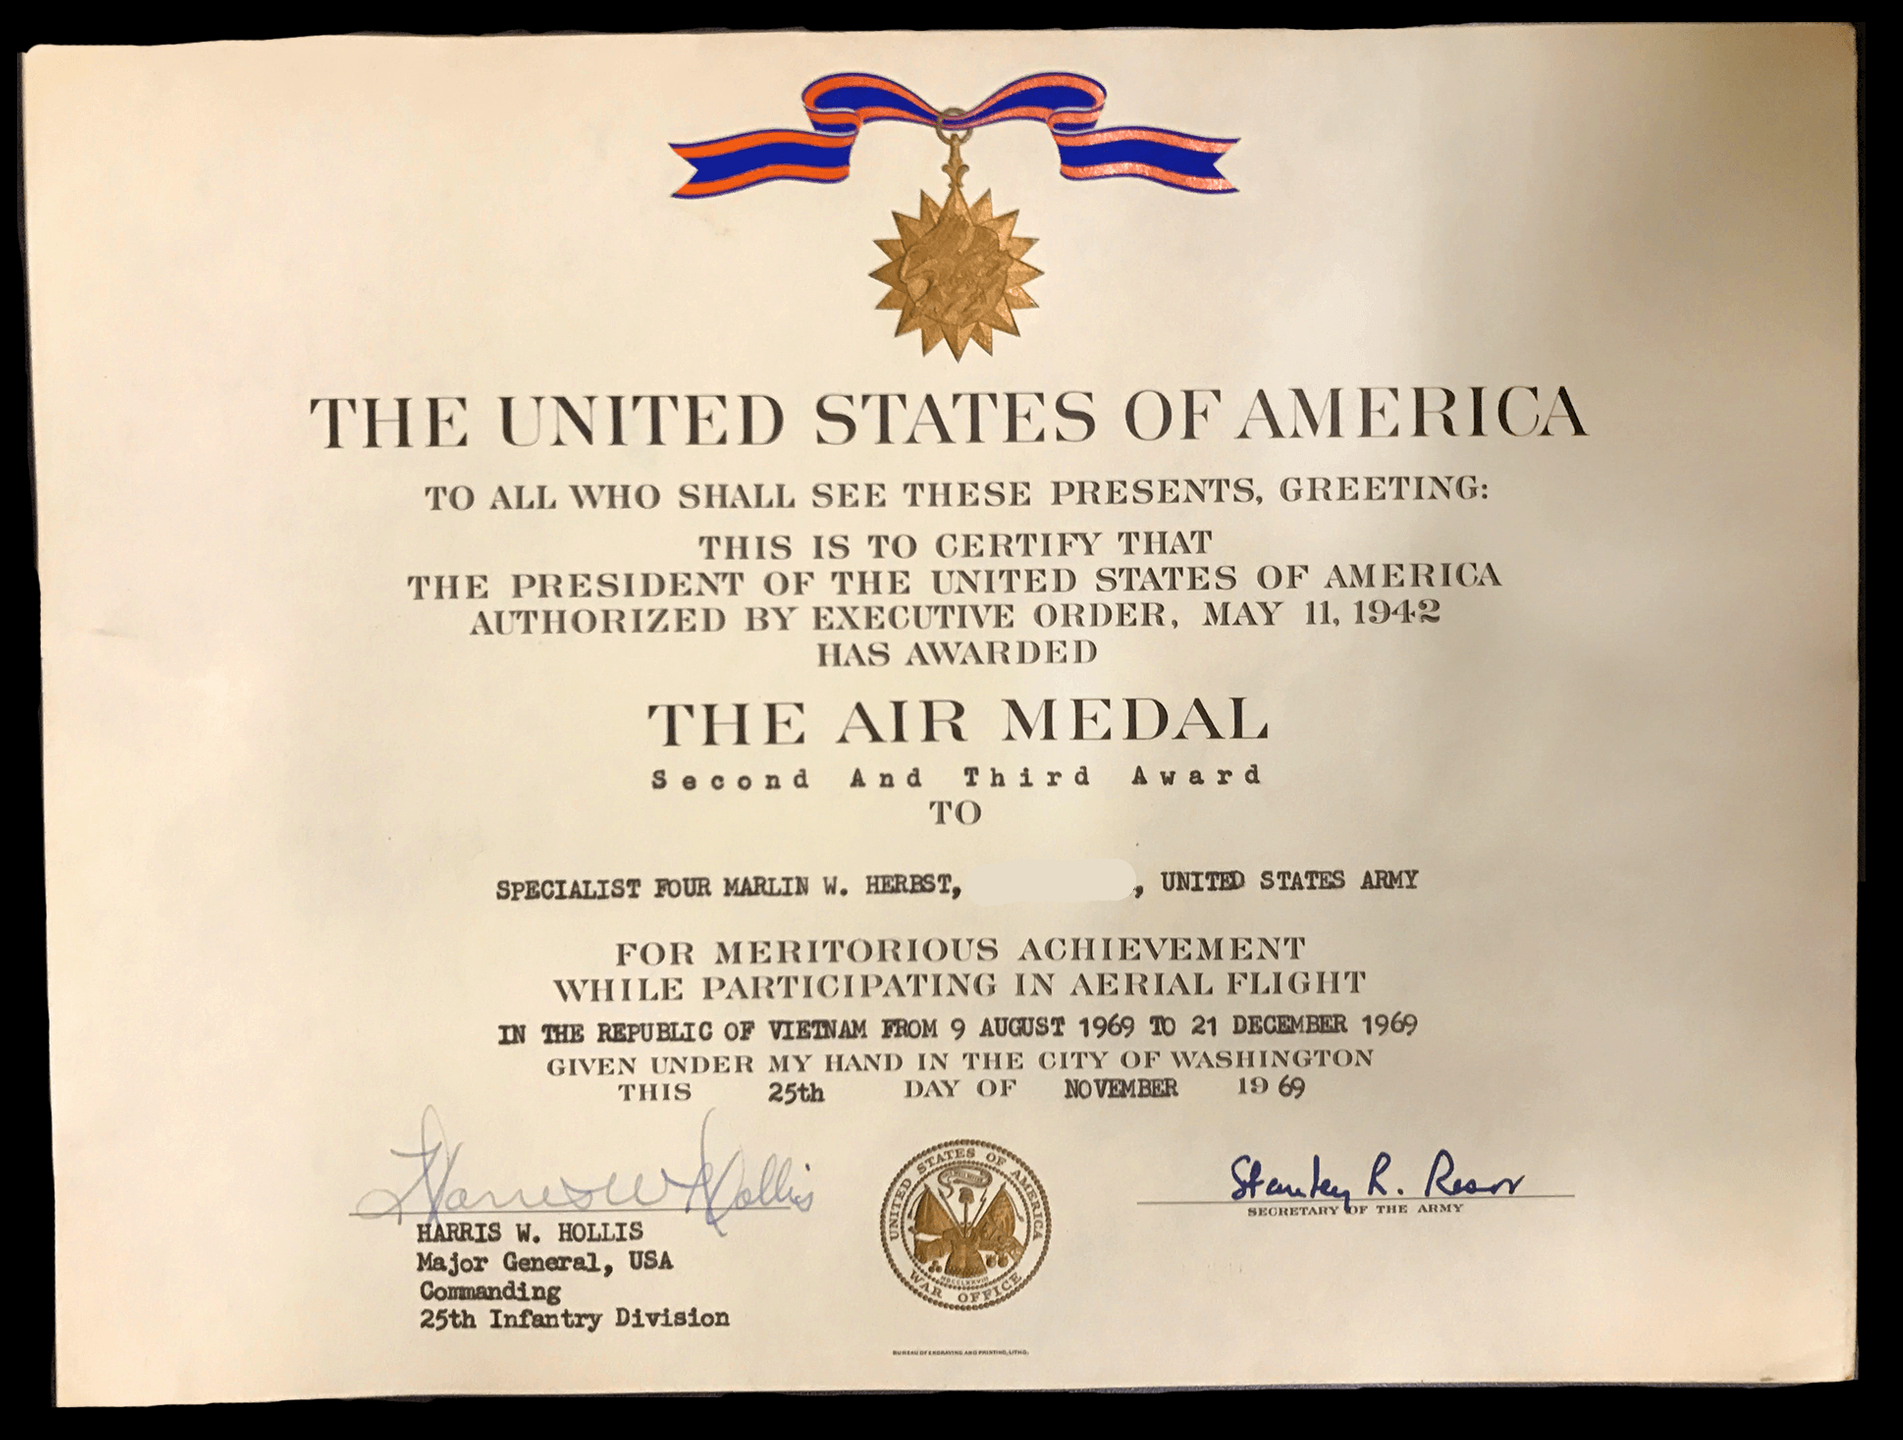 Certificate for an Air Medal, presented to Marlin Herbst on 11-25-1969.